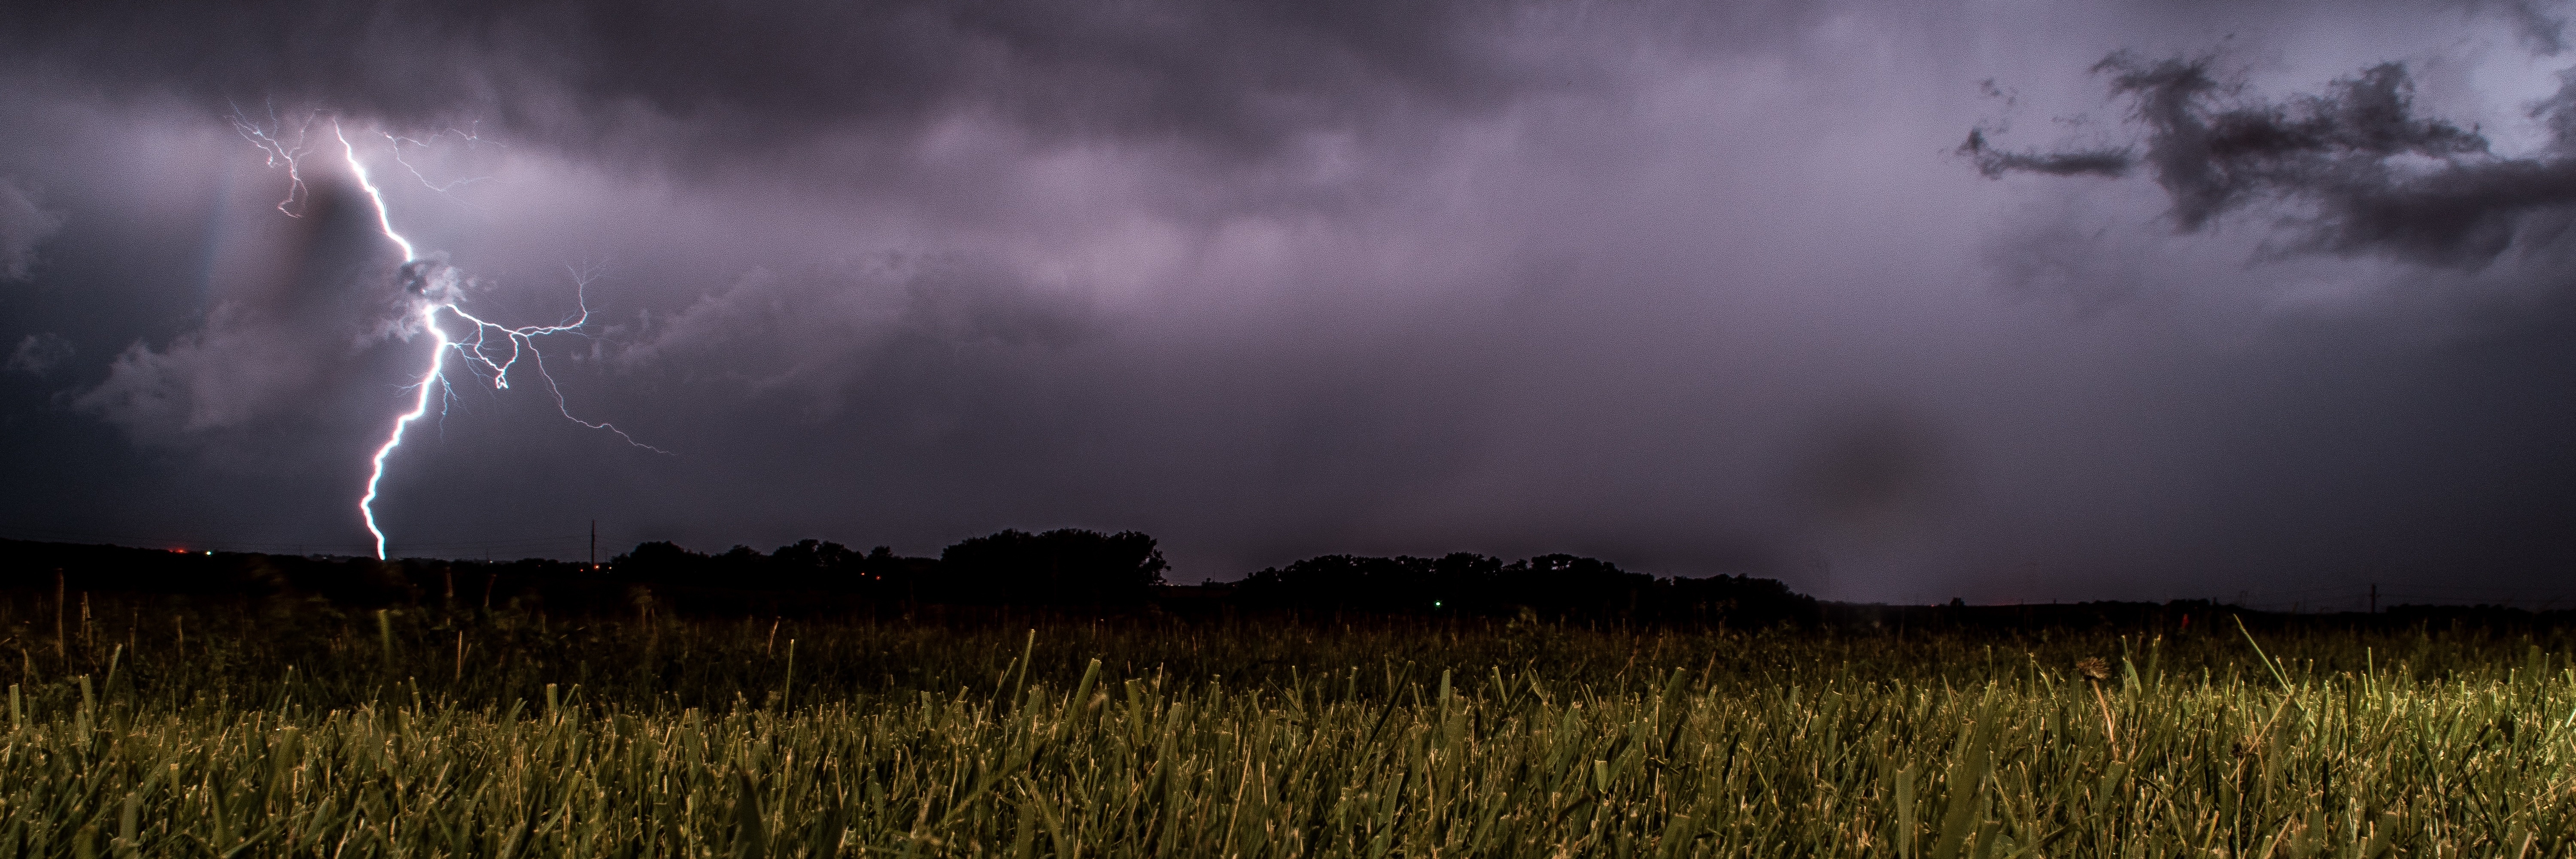 storm and lightning over fields